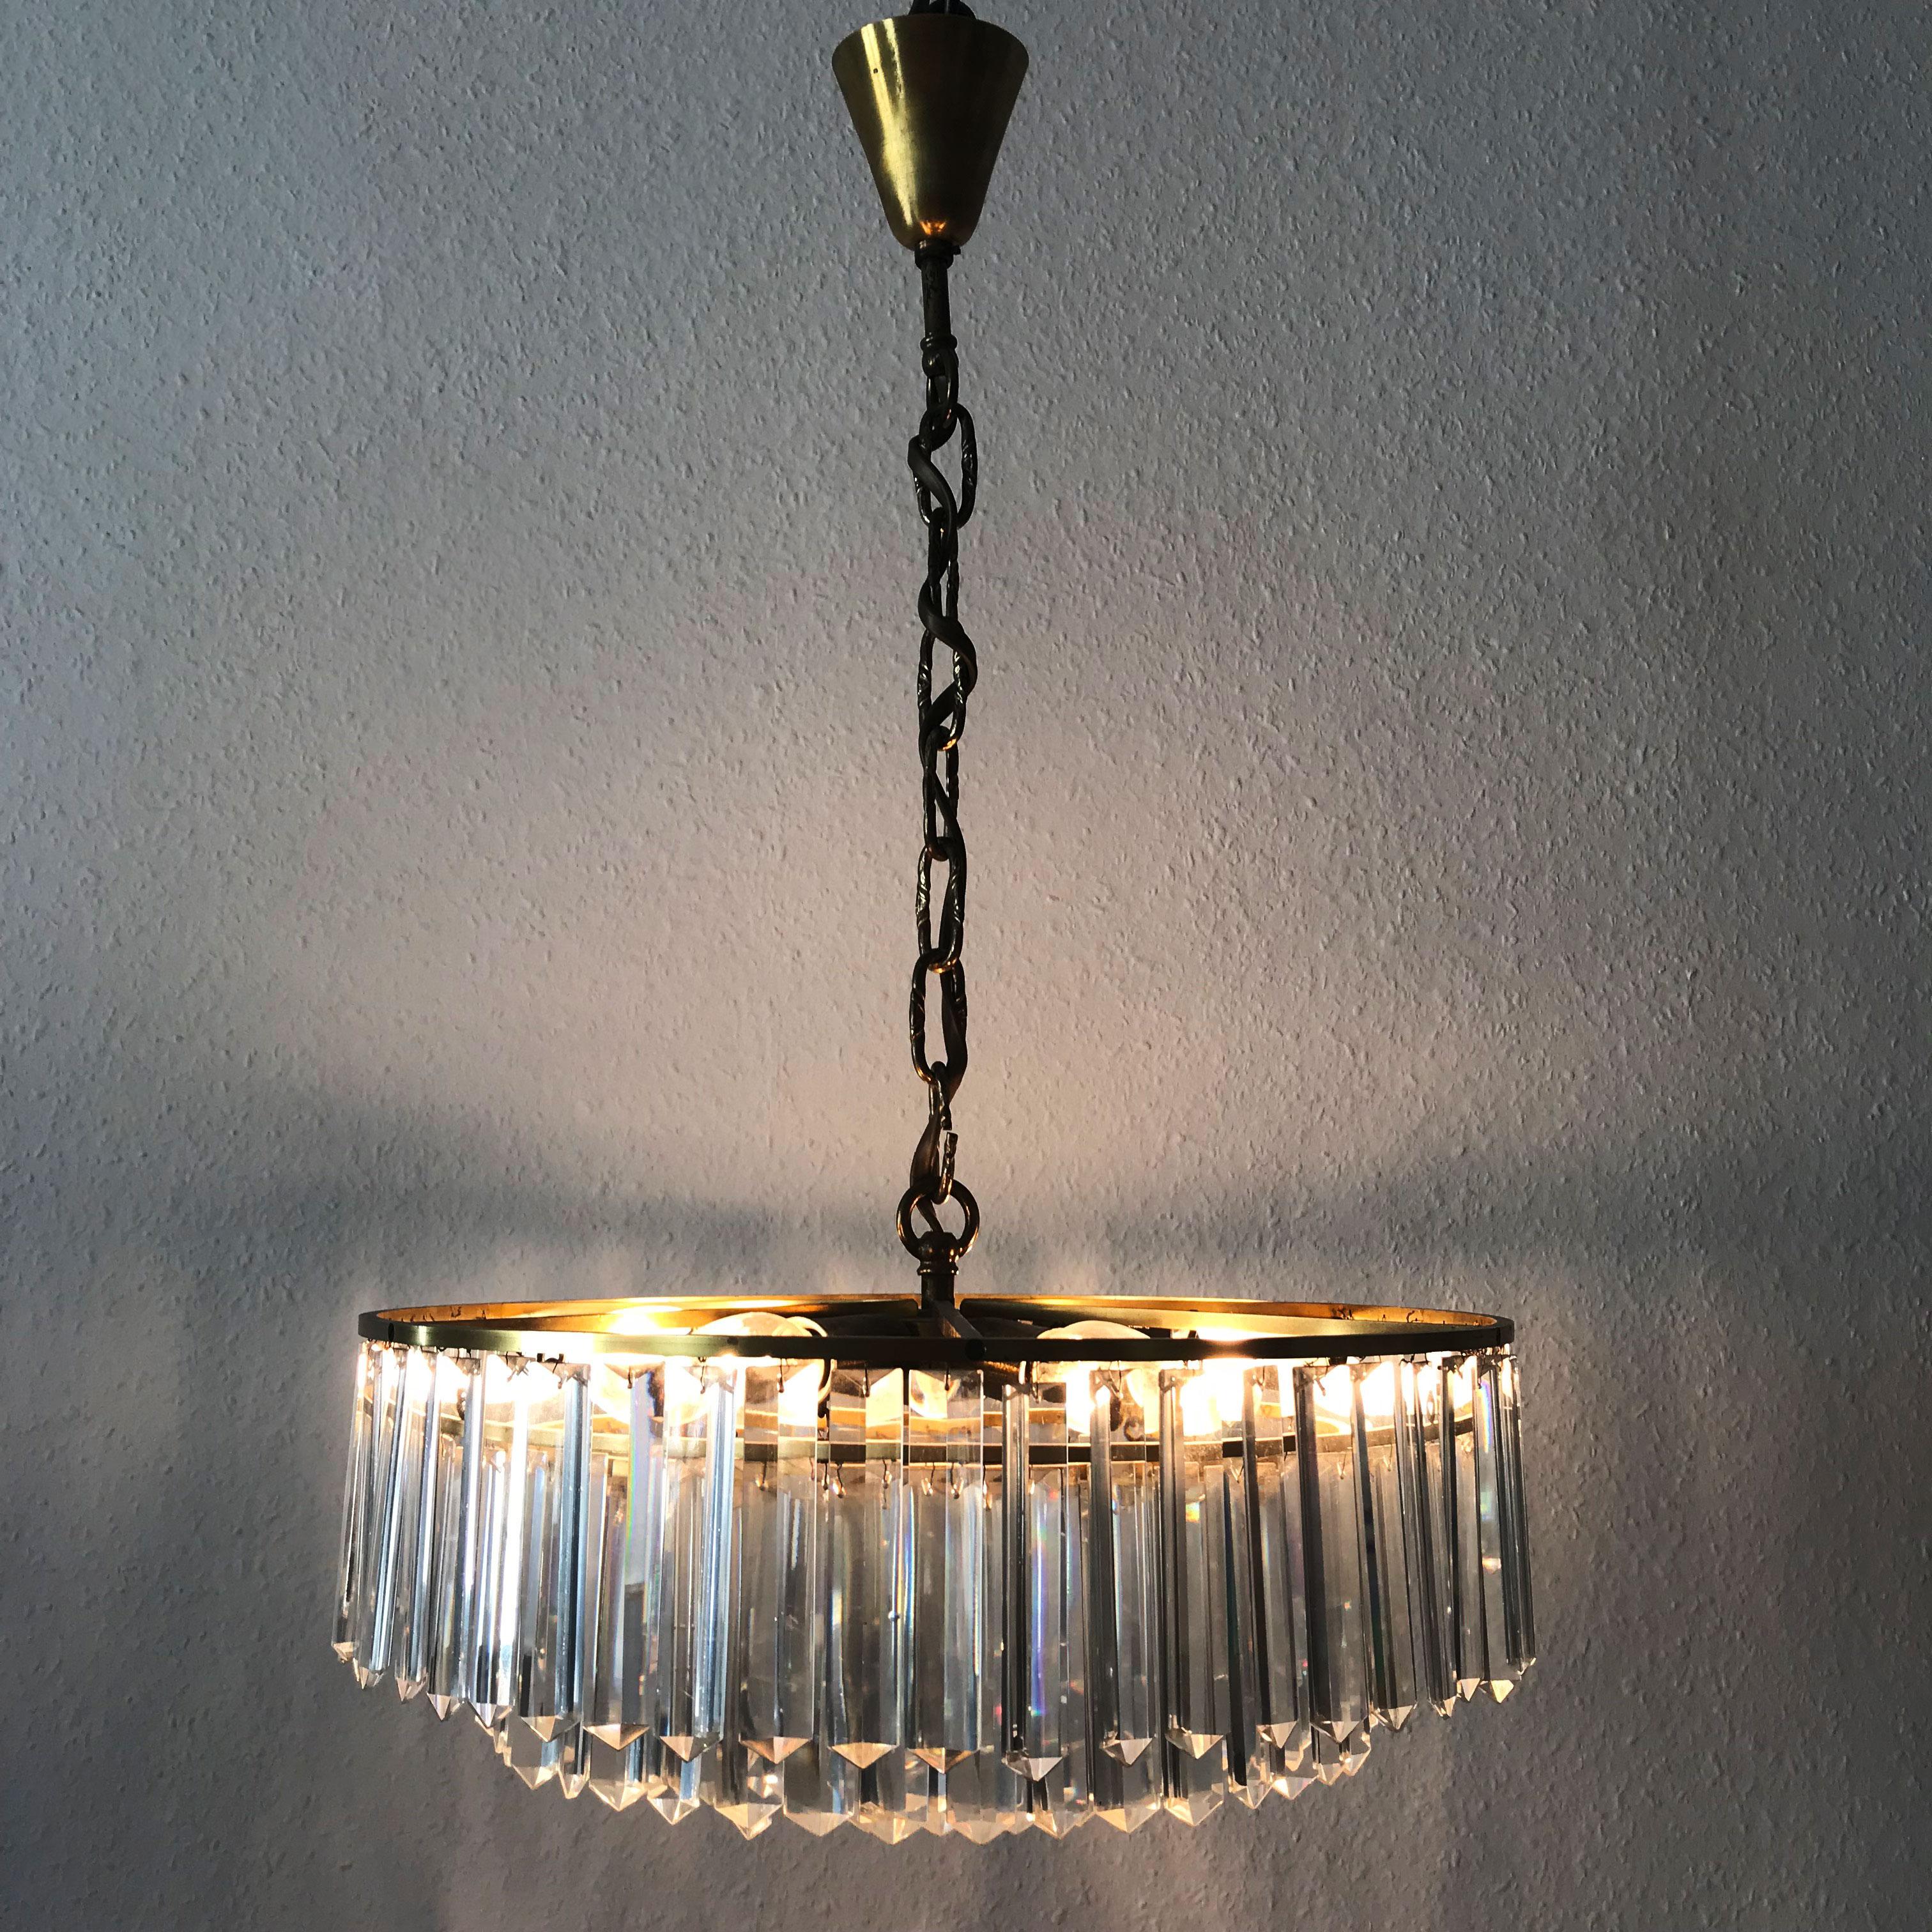 Austrian Crystal Glass Chandelier or Pendant Lamp by Bakalowits & Söhne, Vienna, 1950s For Sale